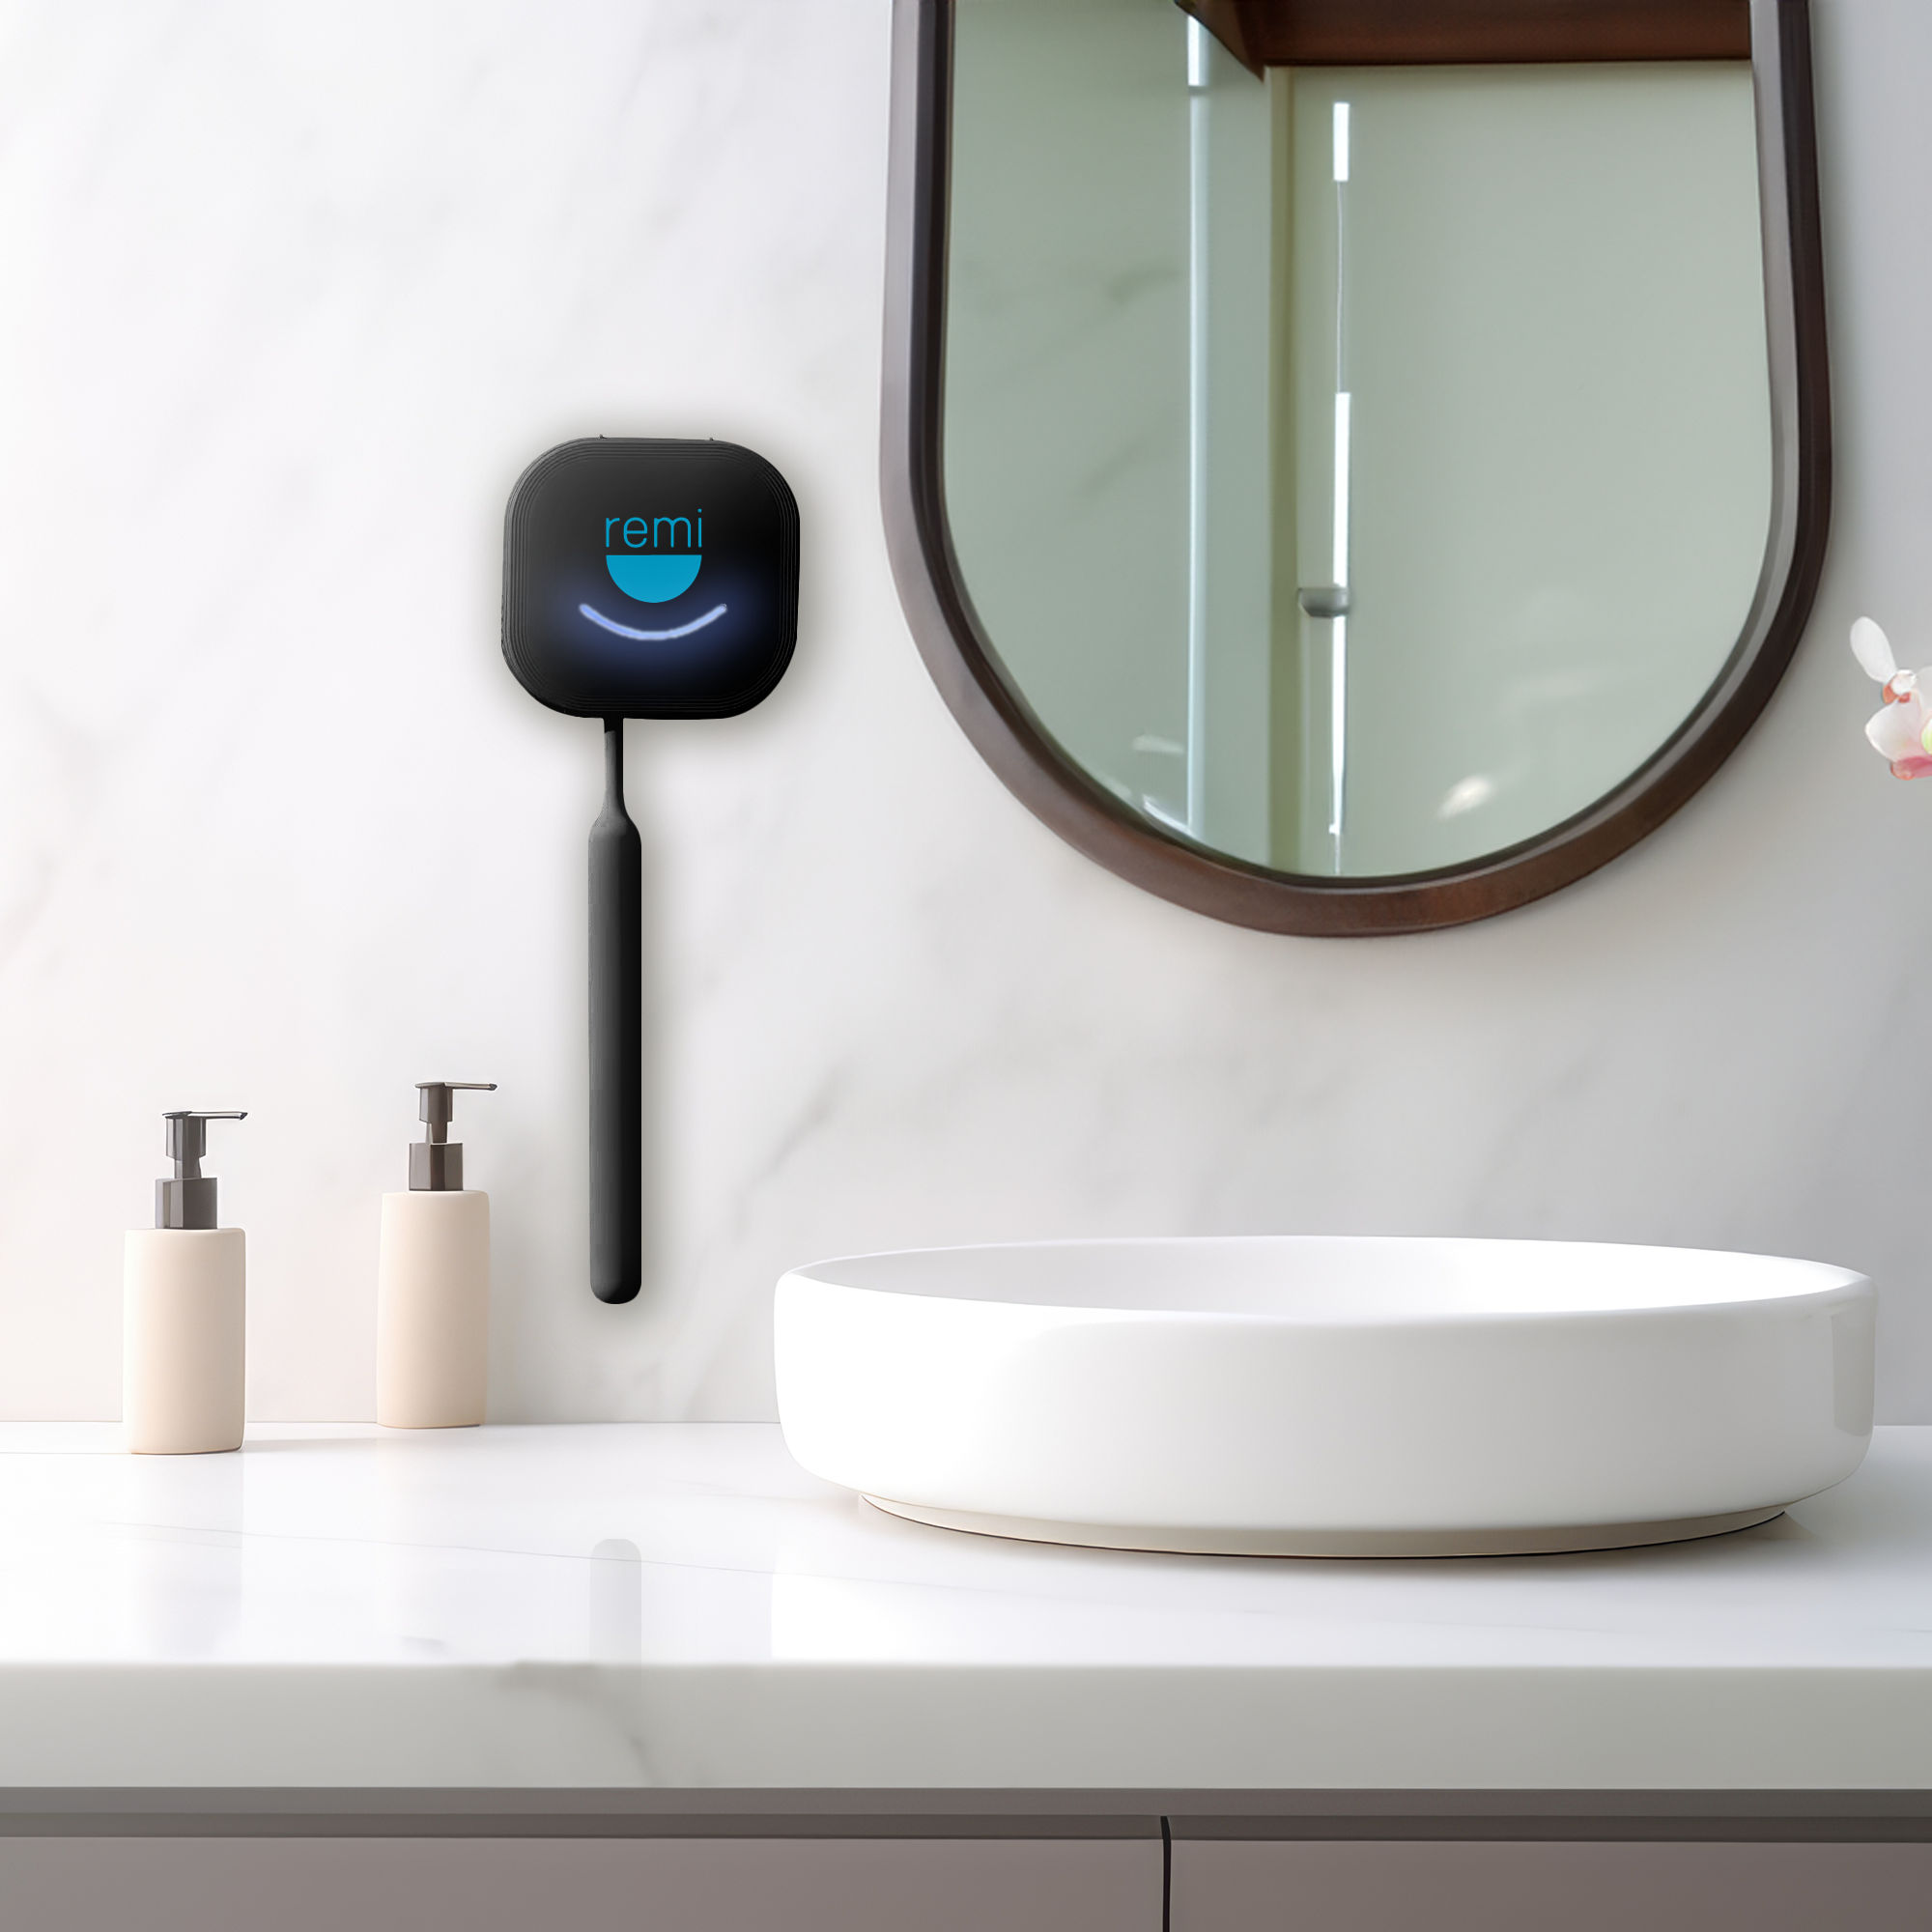 A modern bathroom featuring a white countertop with a rectangular sink, two beige soap dispensers, and a smart mirror displaying the word "remi" alongside a Sterilizer Pro UV Toothbrush Sanitizer designed to sterilize.